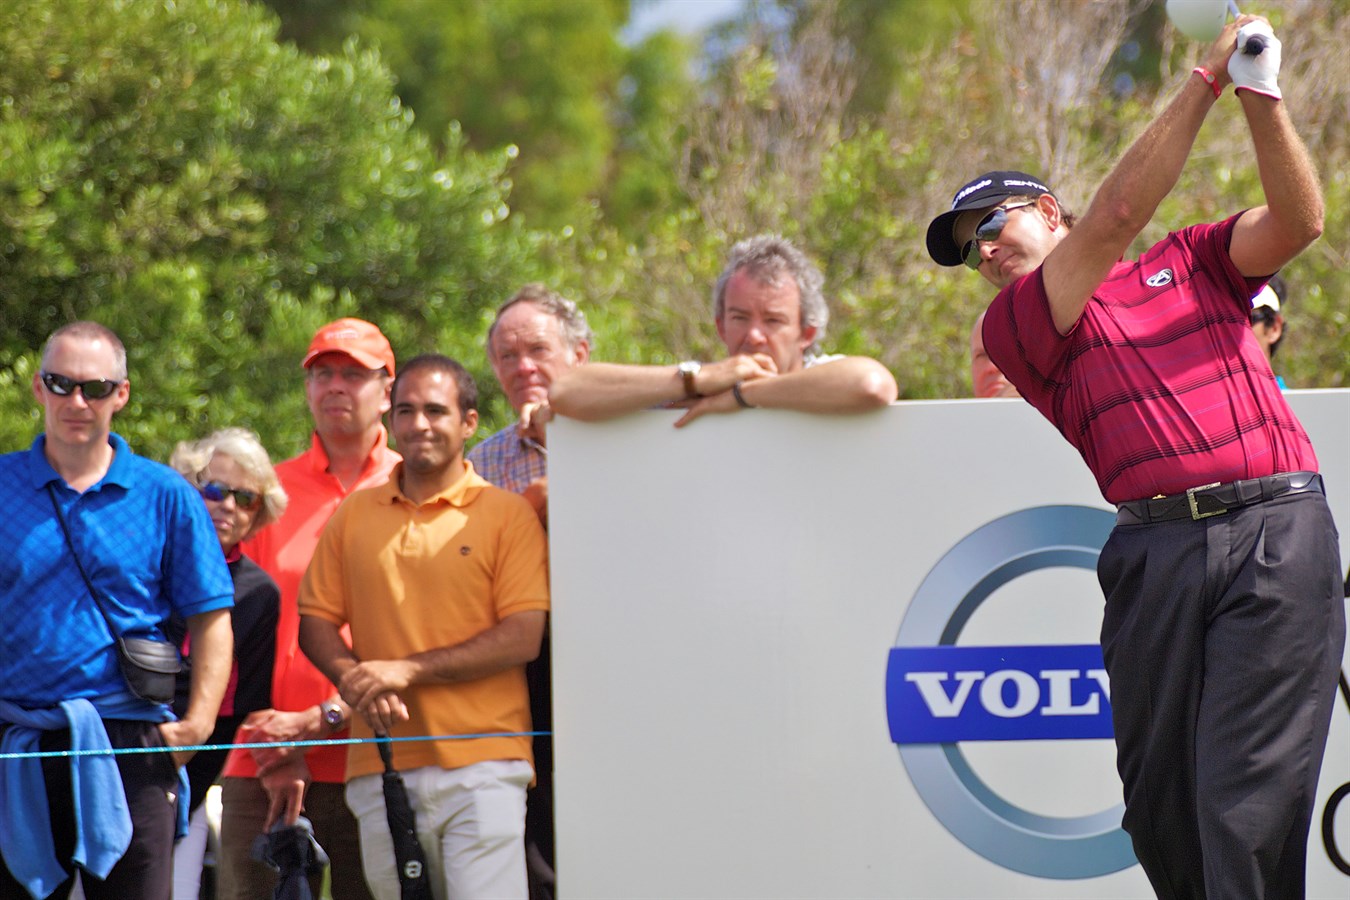 Retief Goosen from South Africa - one of the 2011 Volvo Golf Championsship top players